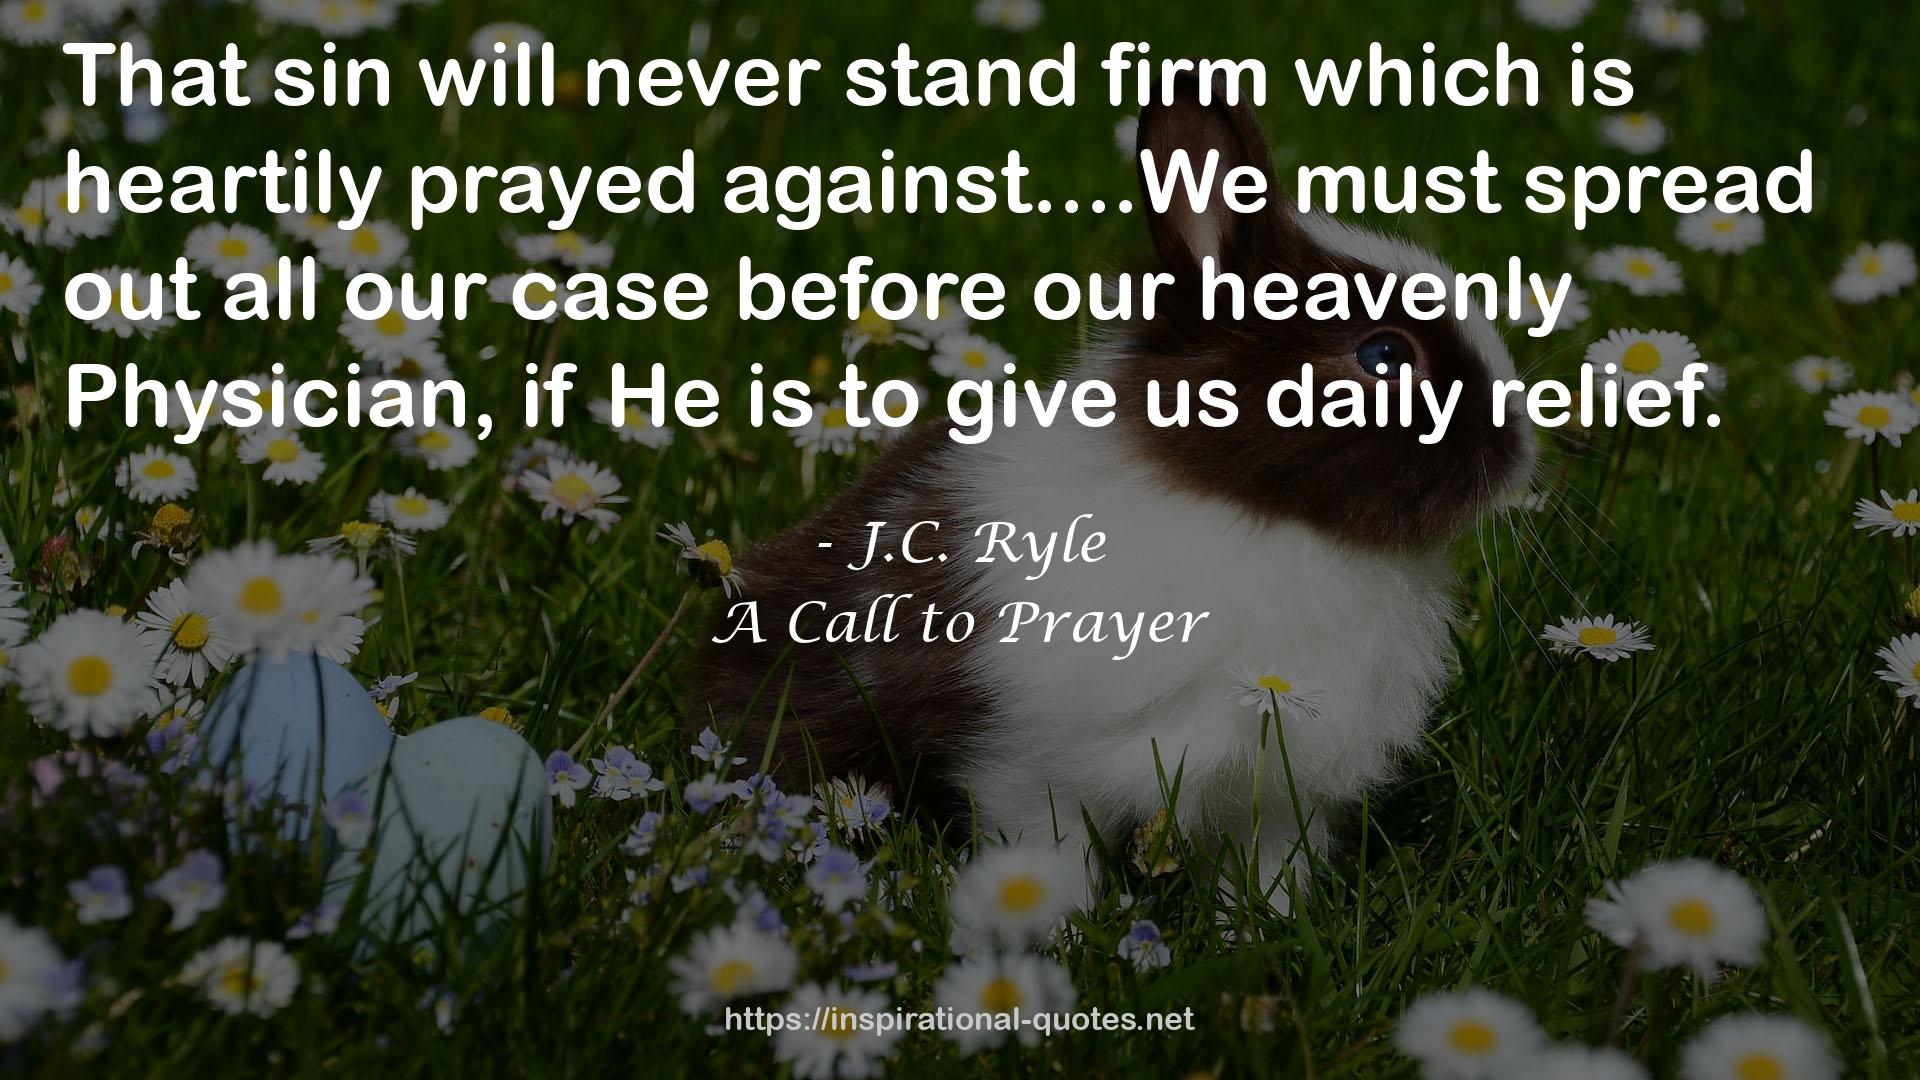 A Call to Prayer QUOTES